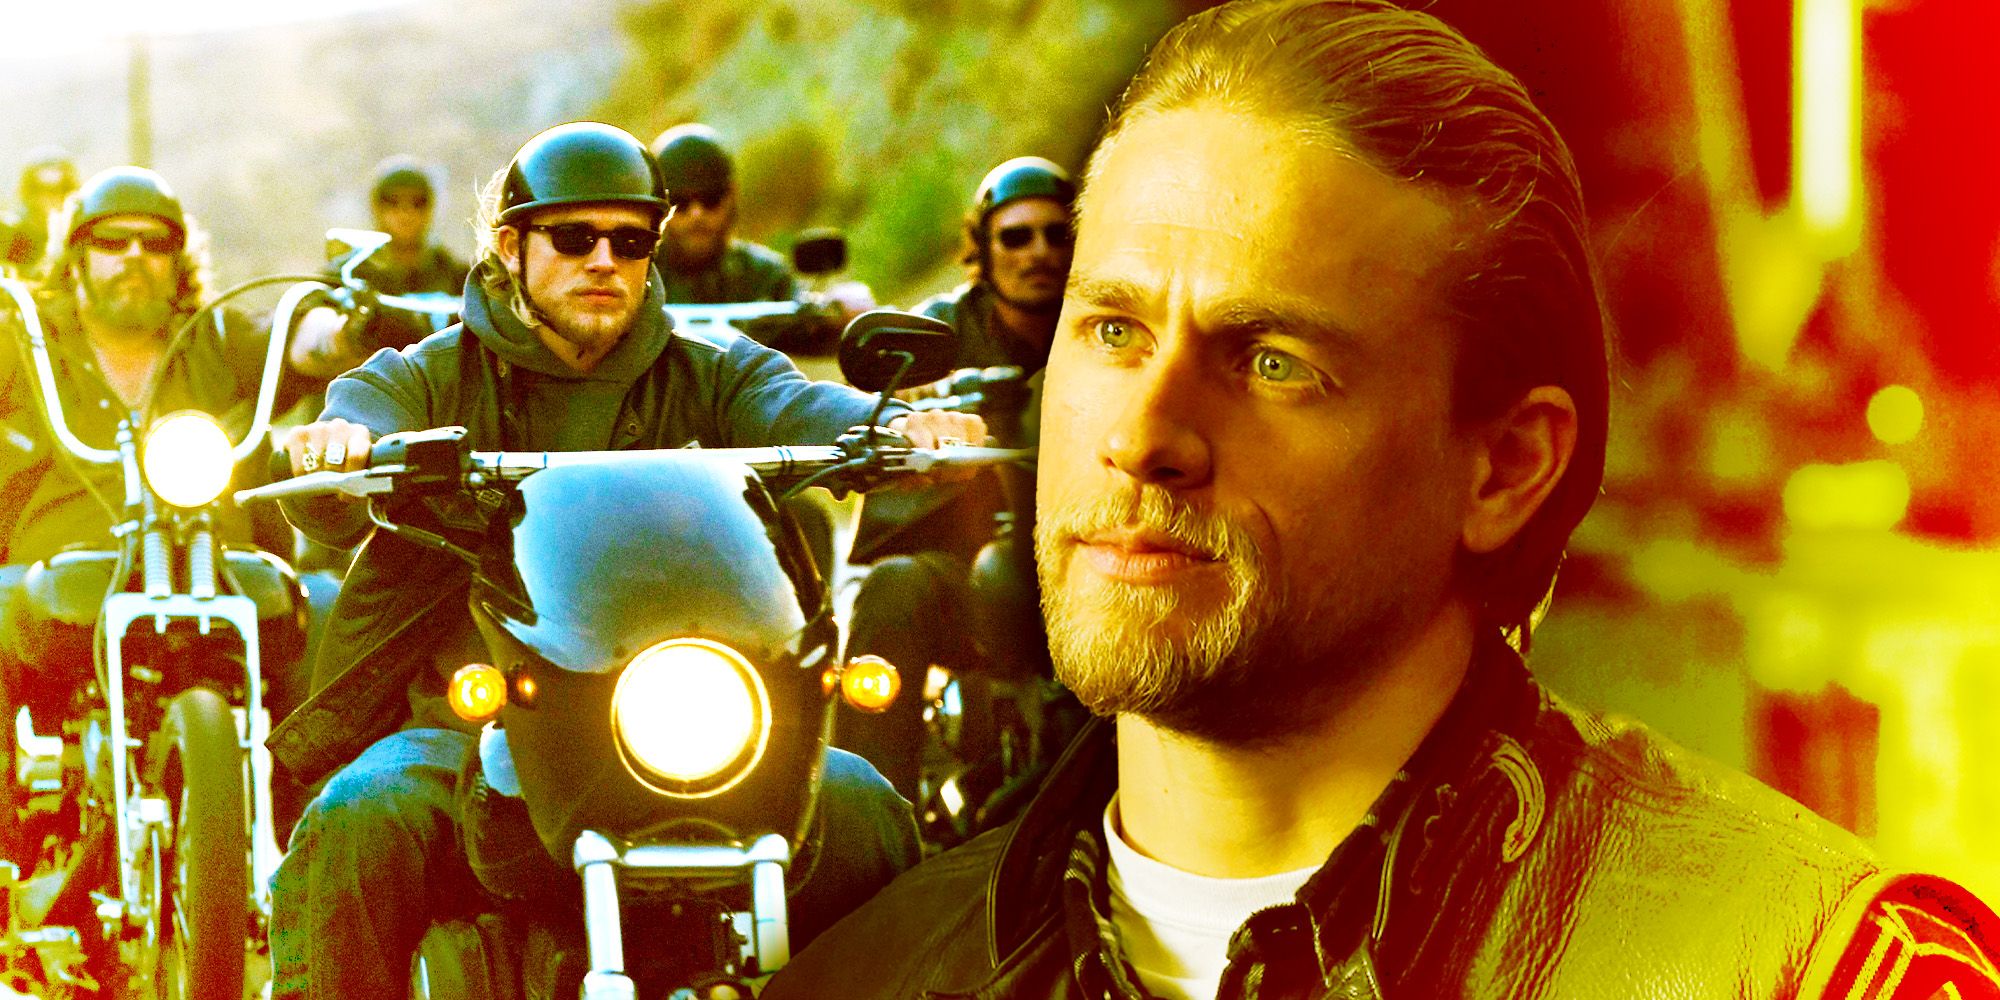 Theo Rossi Hints At A New 'Sons Of Anarchy' Project Featuring Cast From The  Original Series